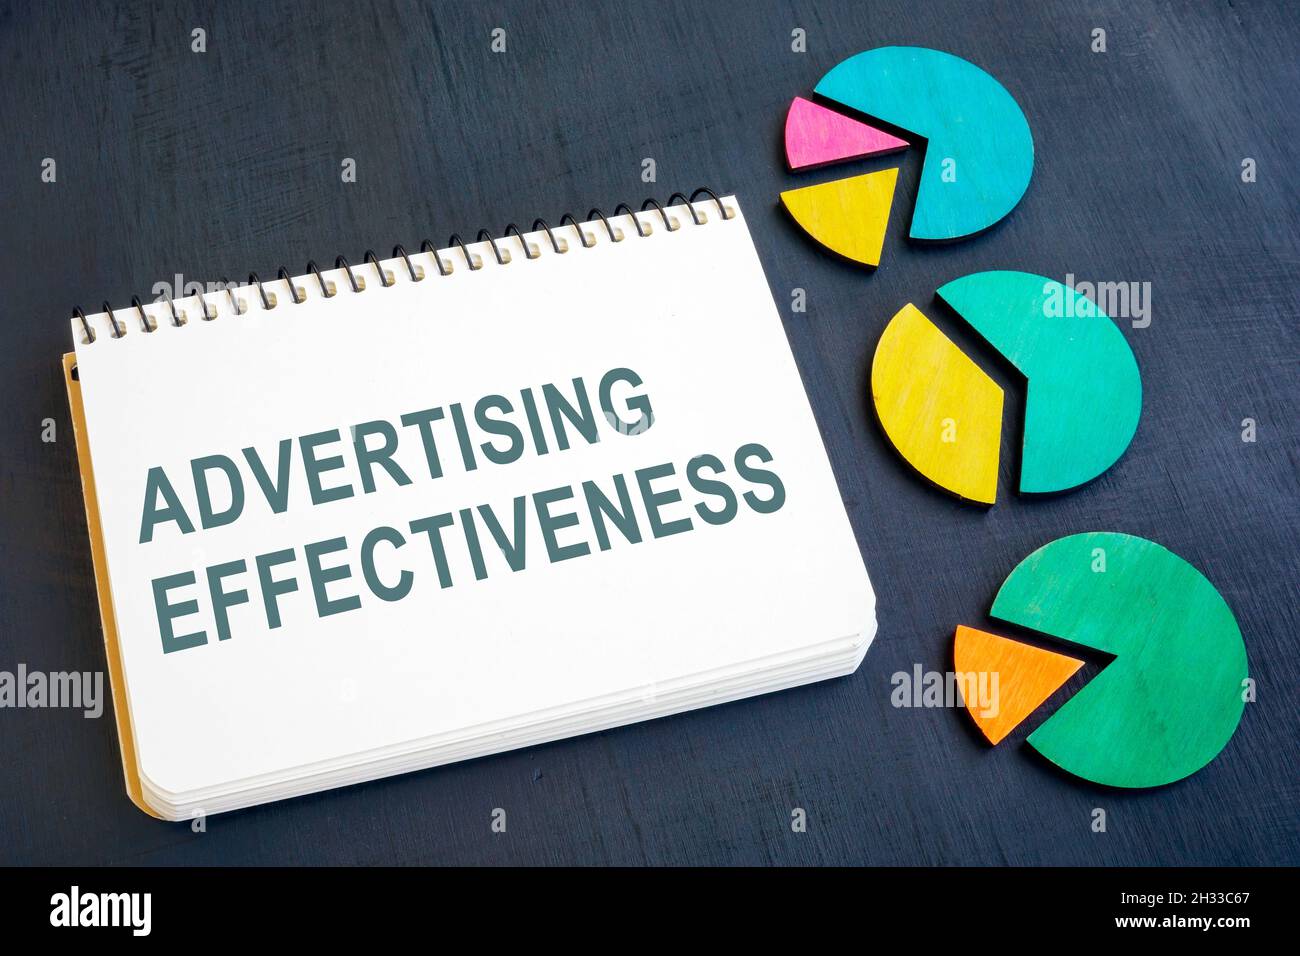 Advertising effectiveness concept. Notepad and charts on a dark surface. Stock Photo